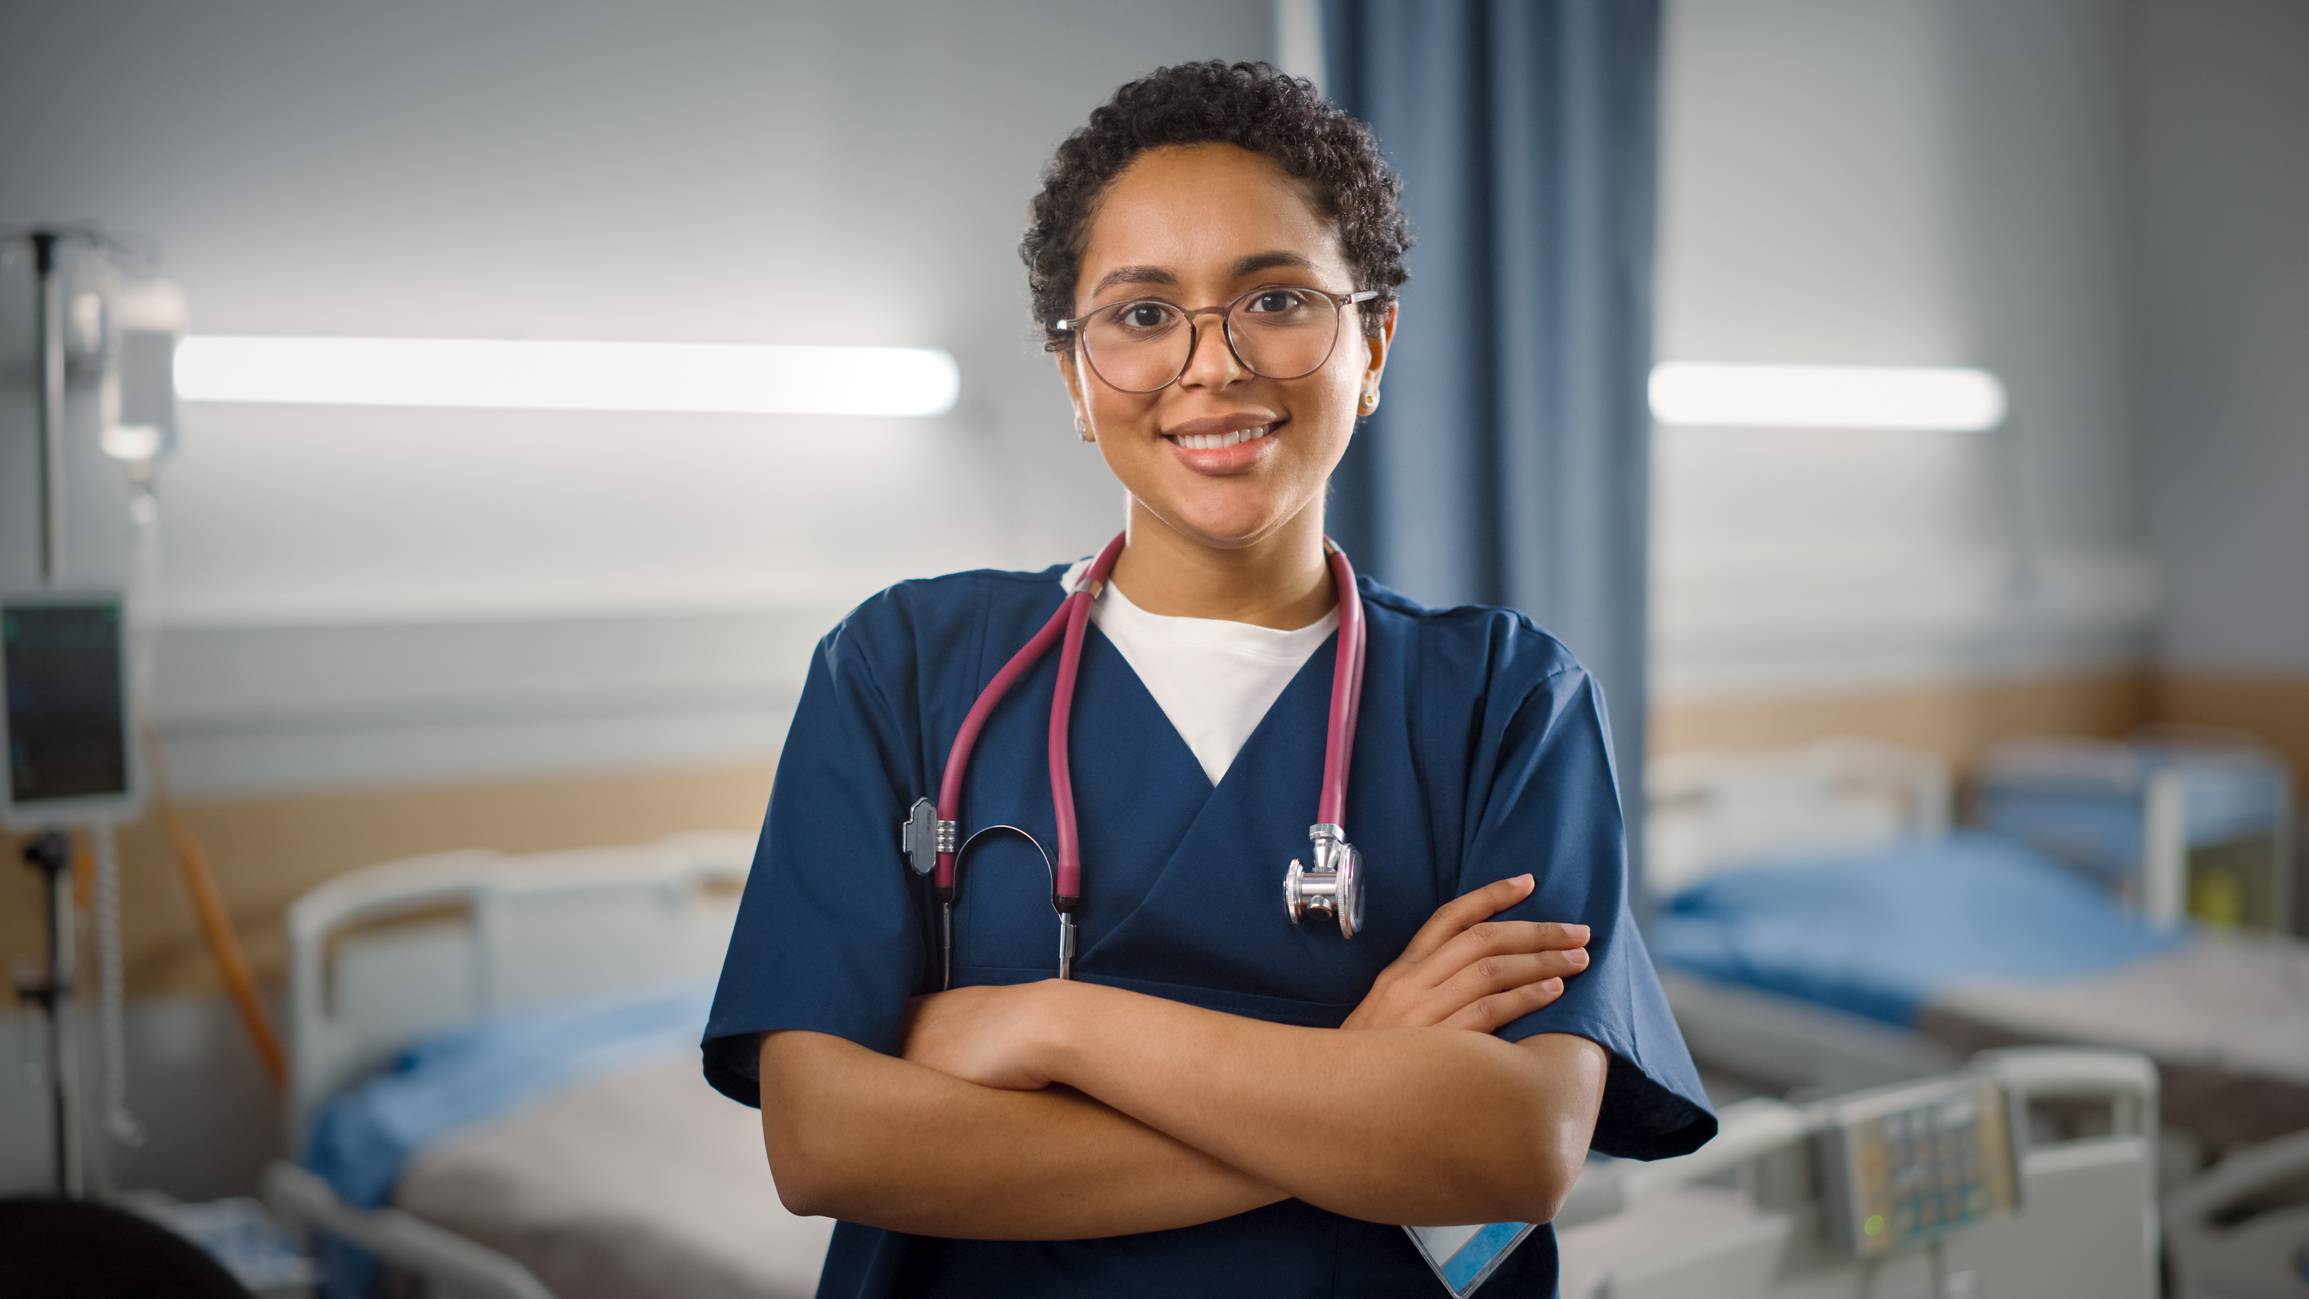 A nurse with a stethoscope smiling at the camera